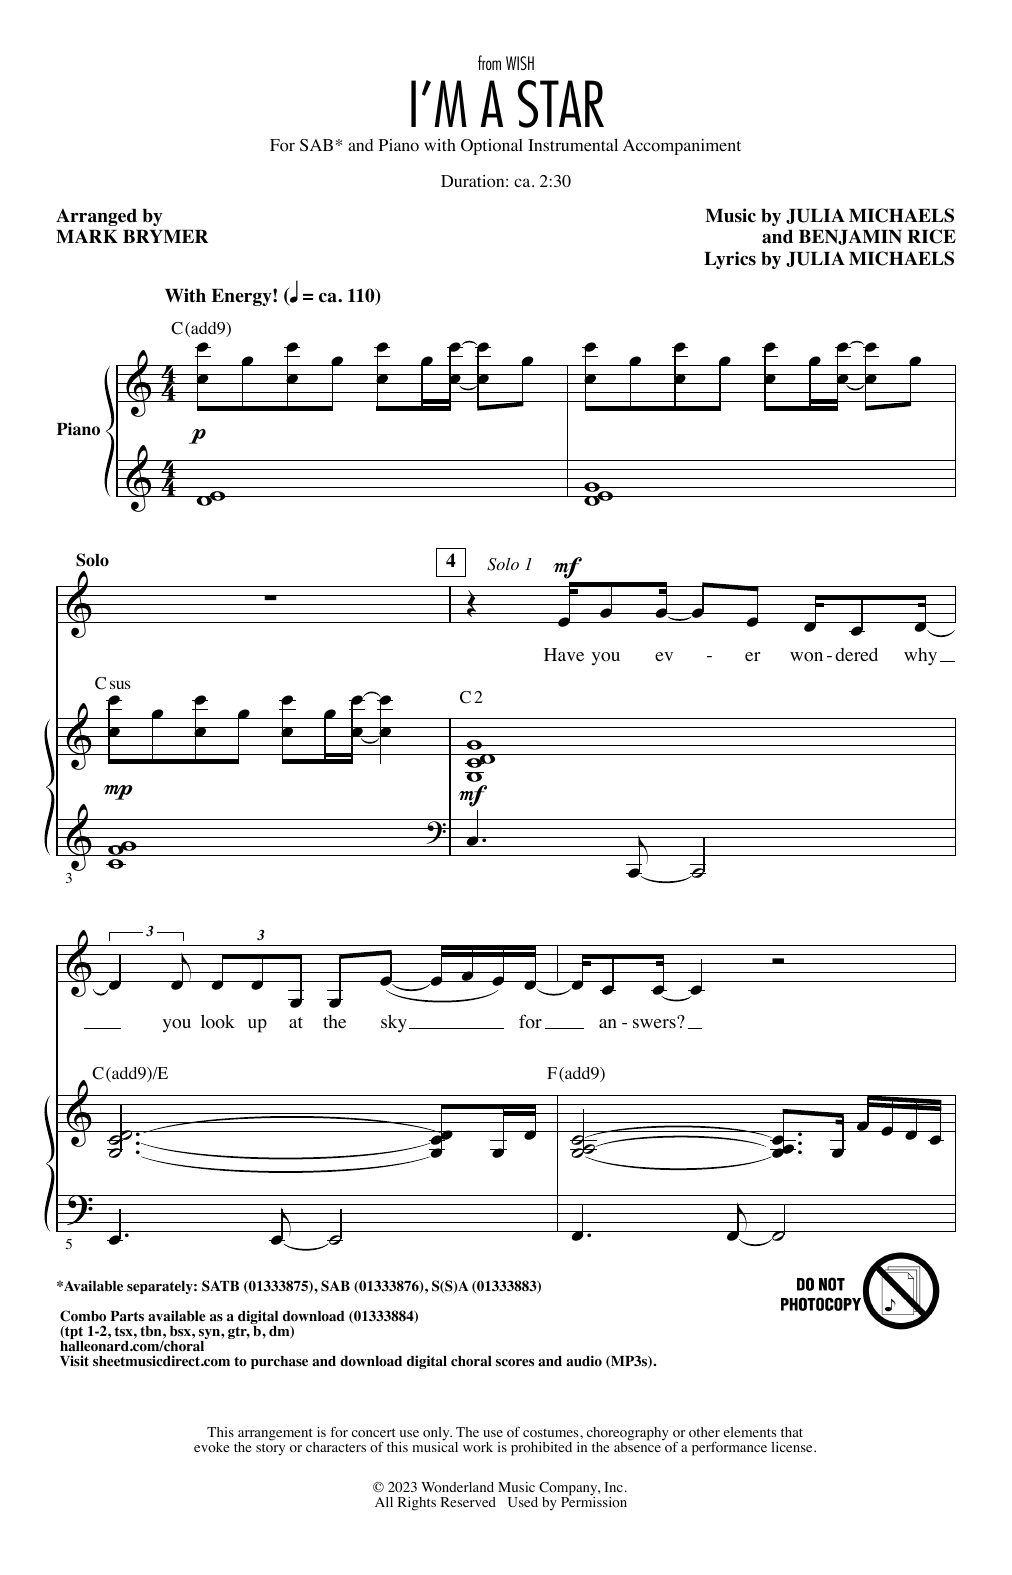 Benjamin Rice and Julia Michaels I'm A Star (from Wish) (arr. Mark Brymer) sheet music notes printable PDF score